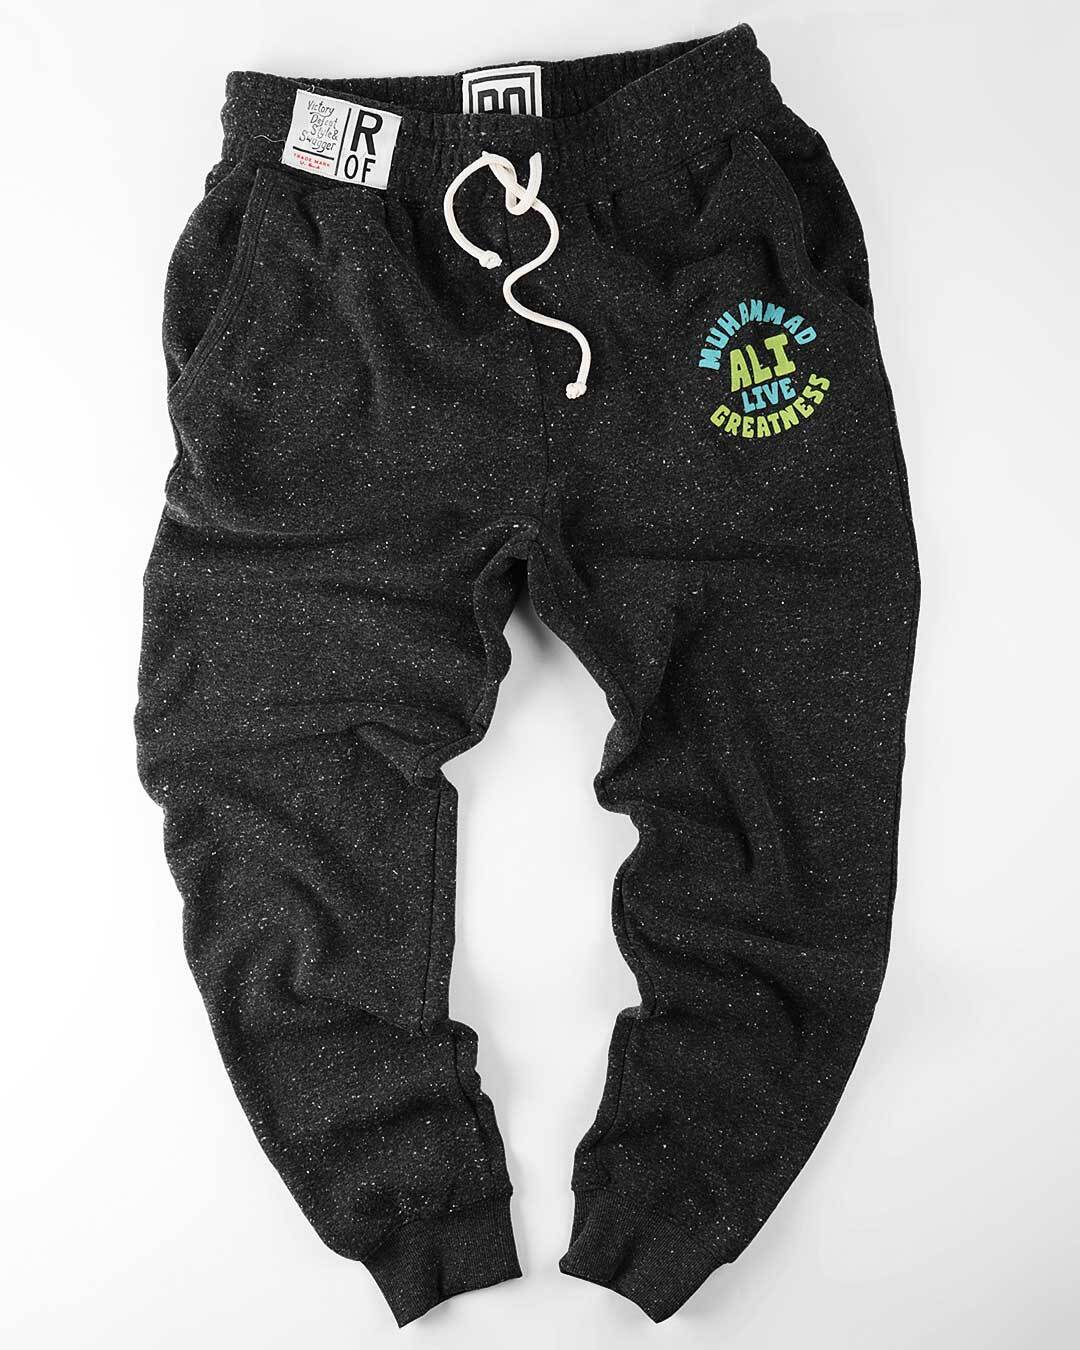 BHT - Ali &#39;Live Greatness&#39; Black Sweatpants - Roots of Fight Canada